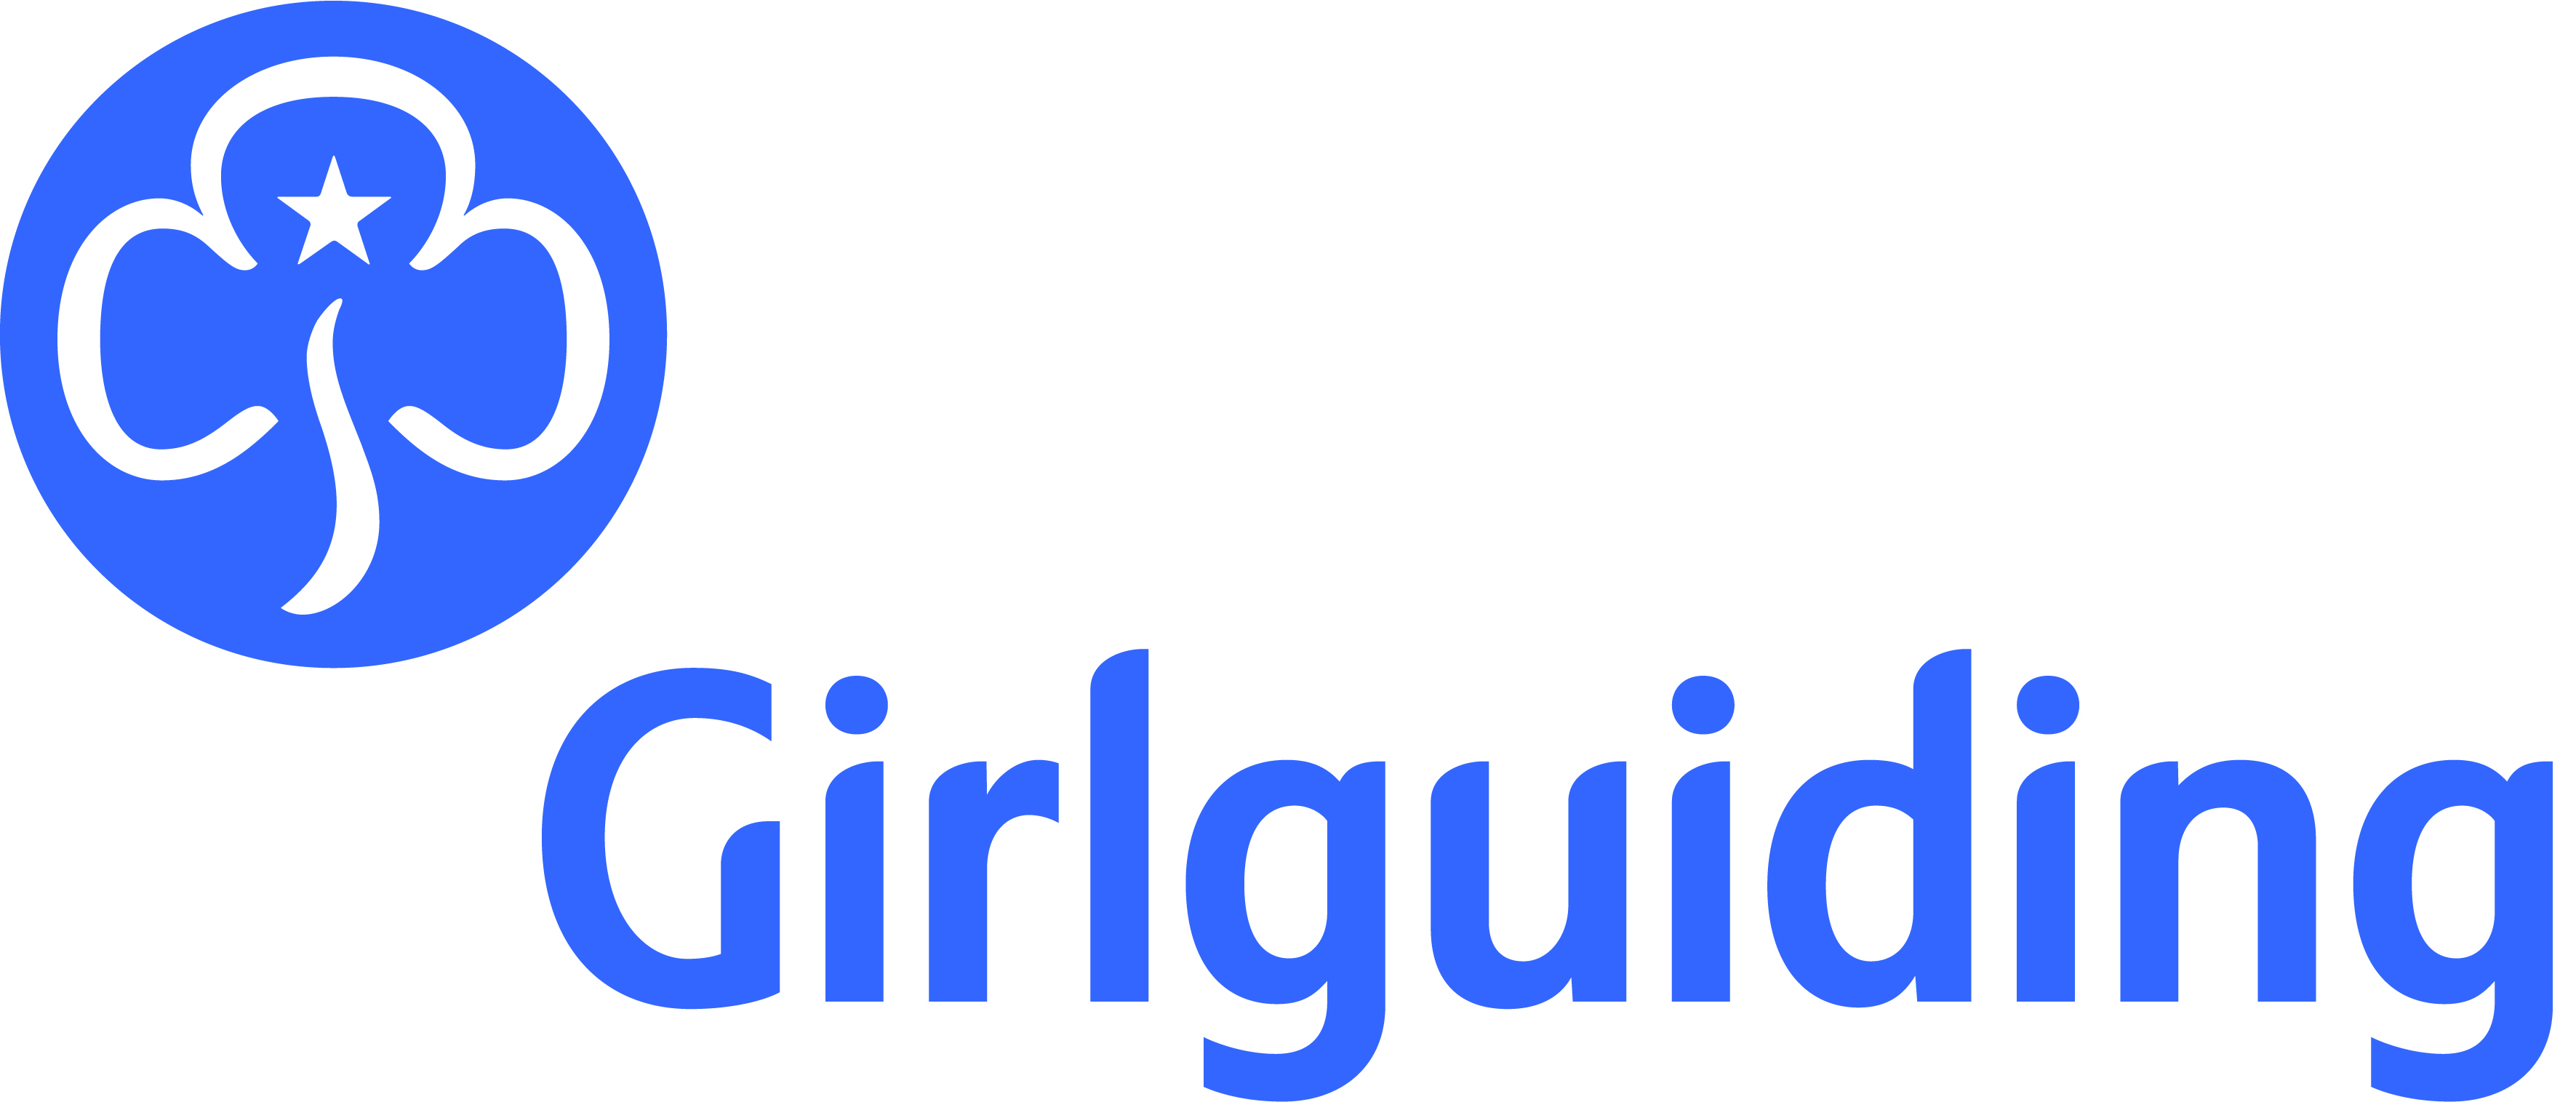 free clipart girl guides - photo #15